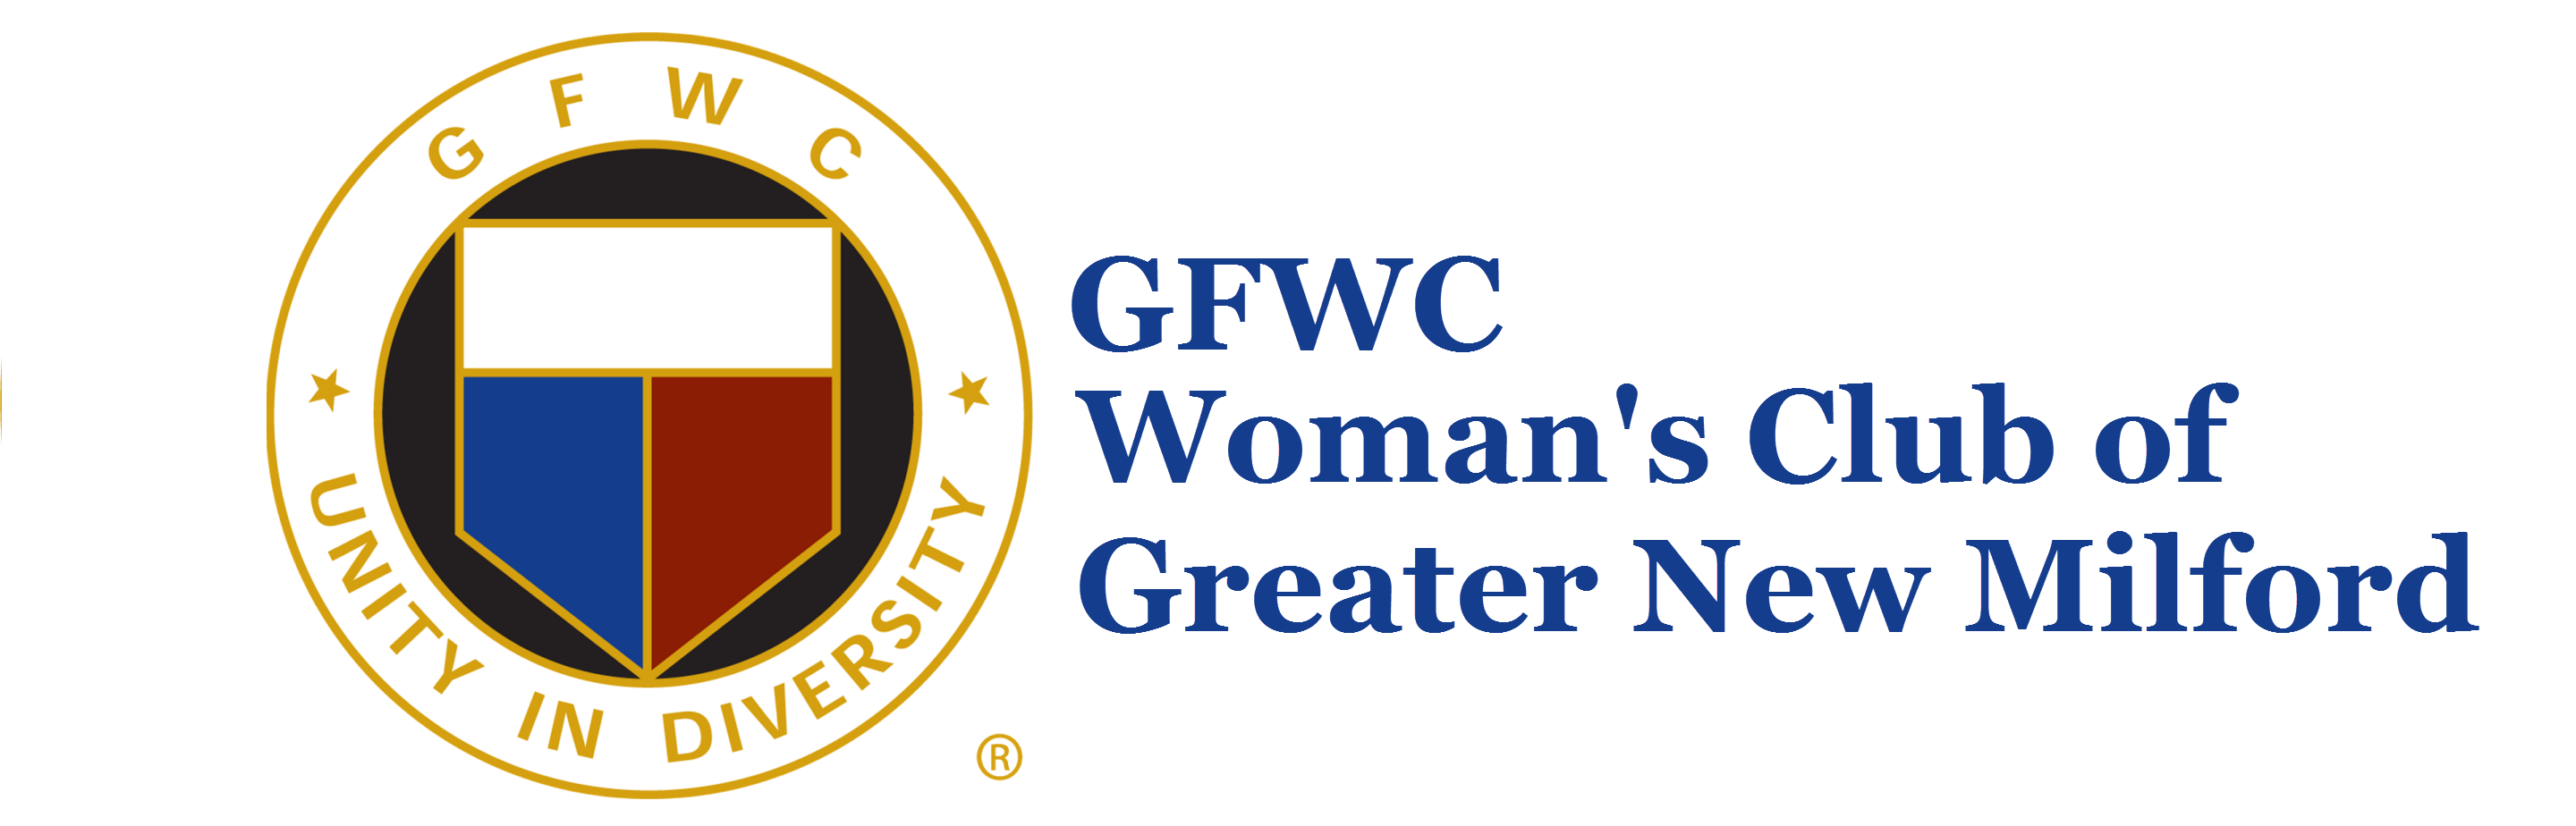 GFWC Woman's Club of Greater New Milford